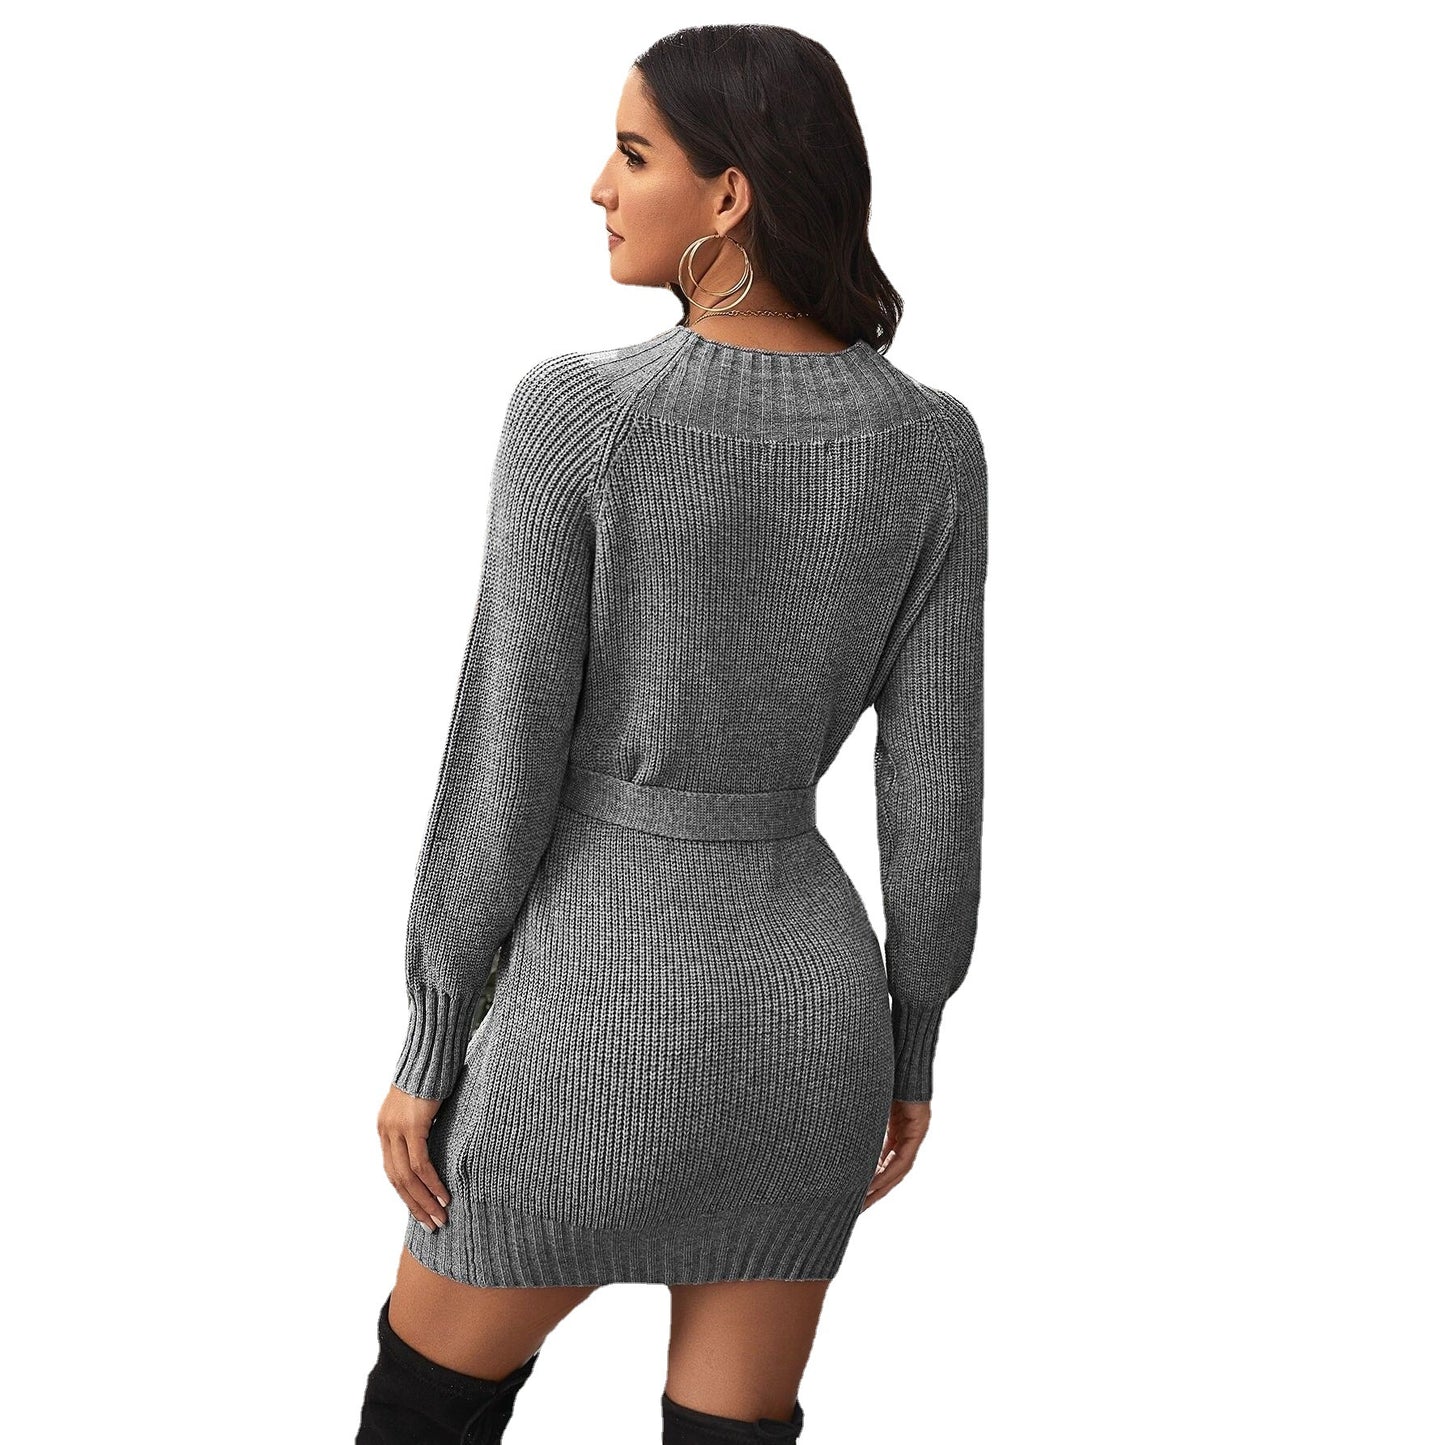 Compliments' Sweater Dress